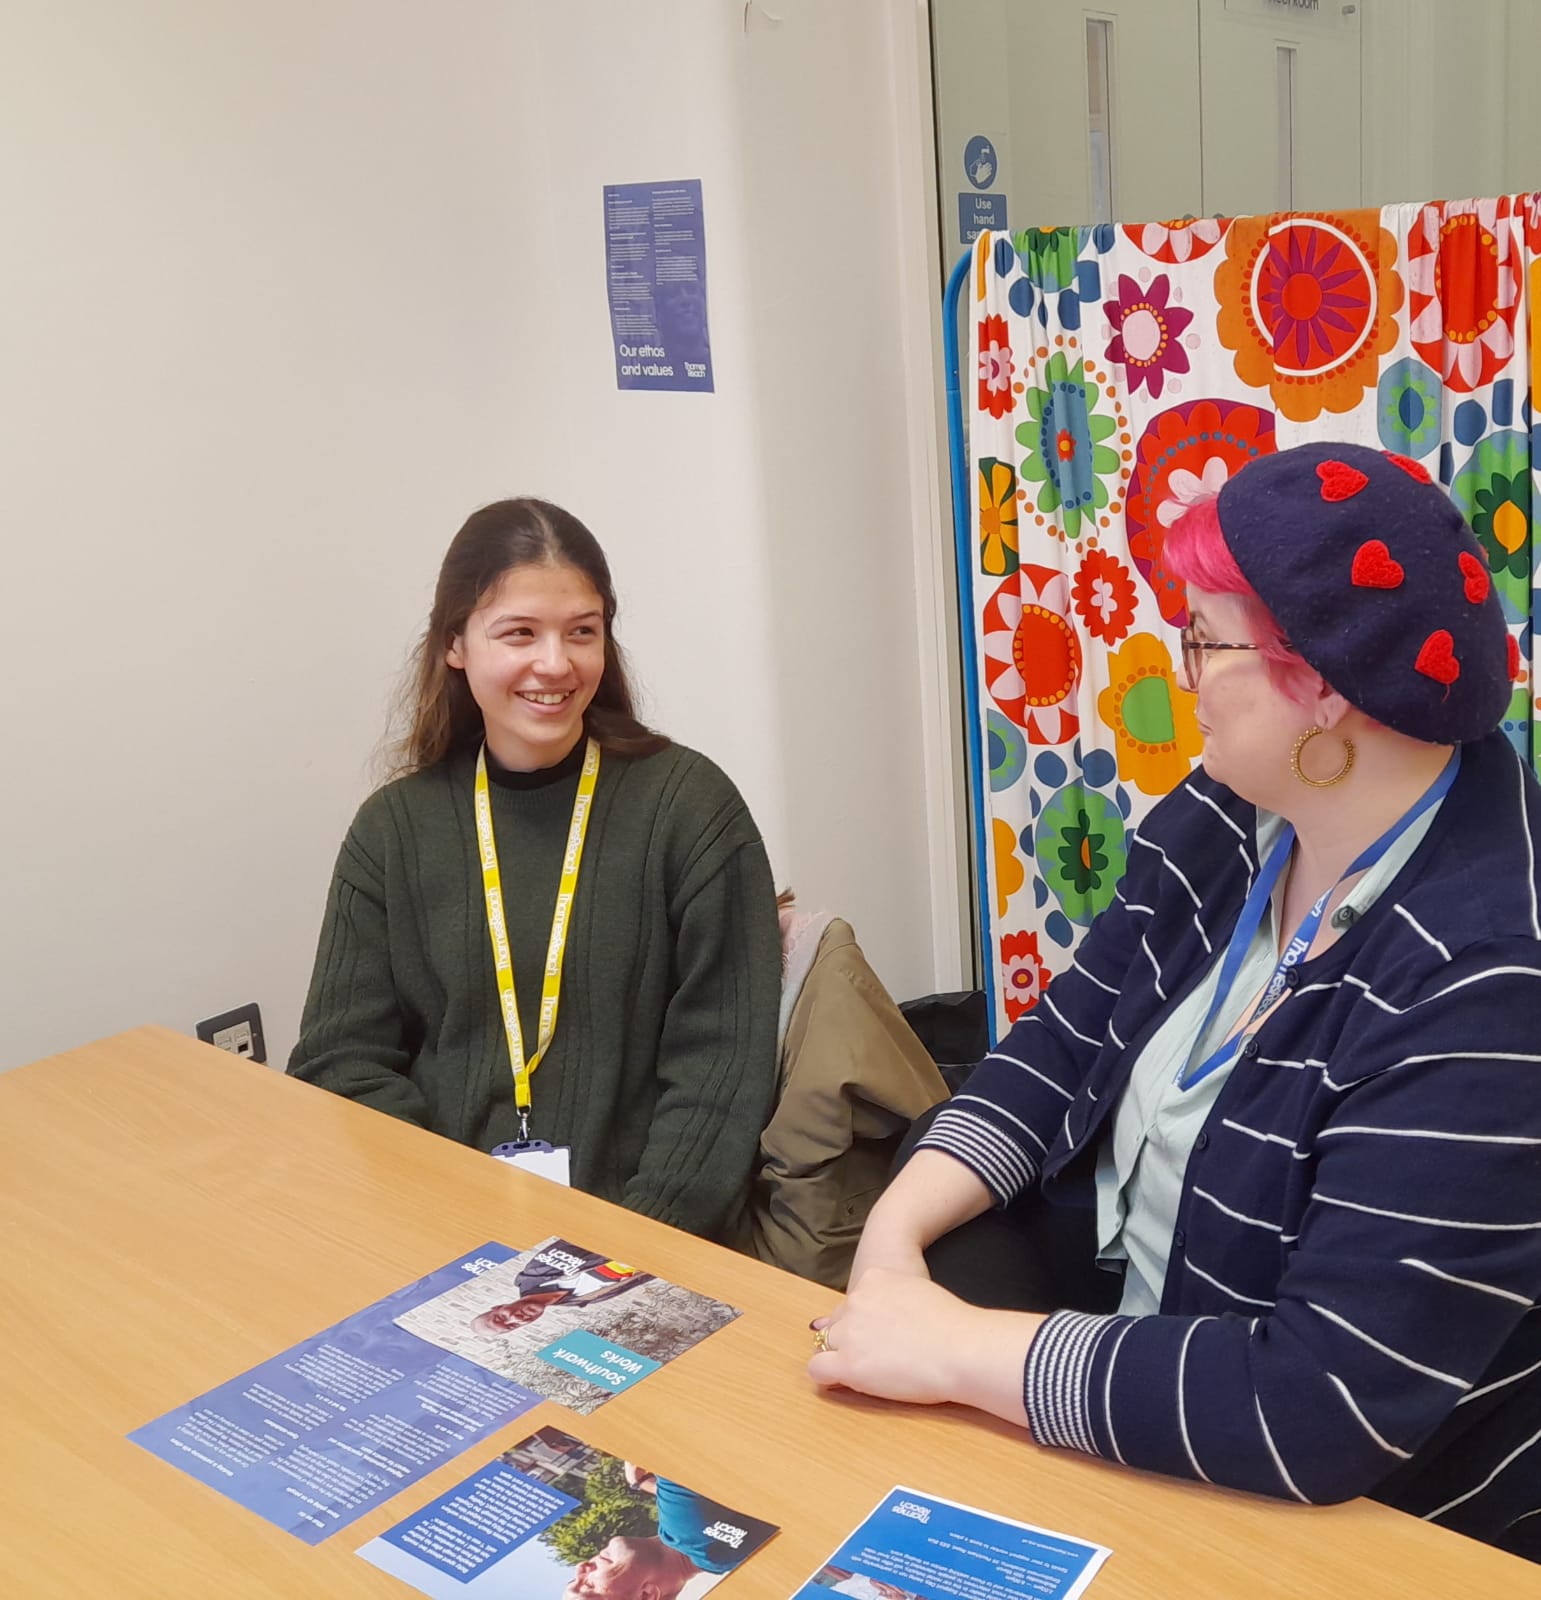 Interview: Volunteering with Thames Reach on placement year